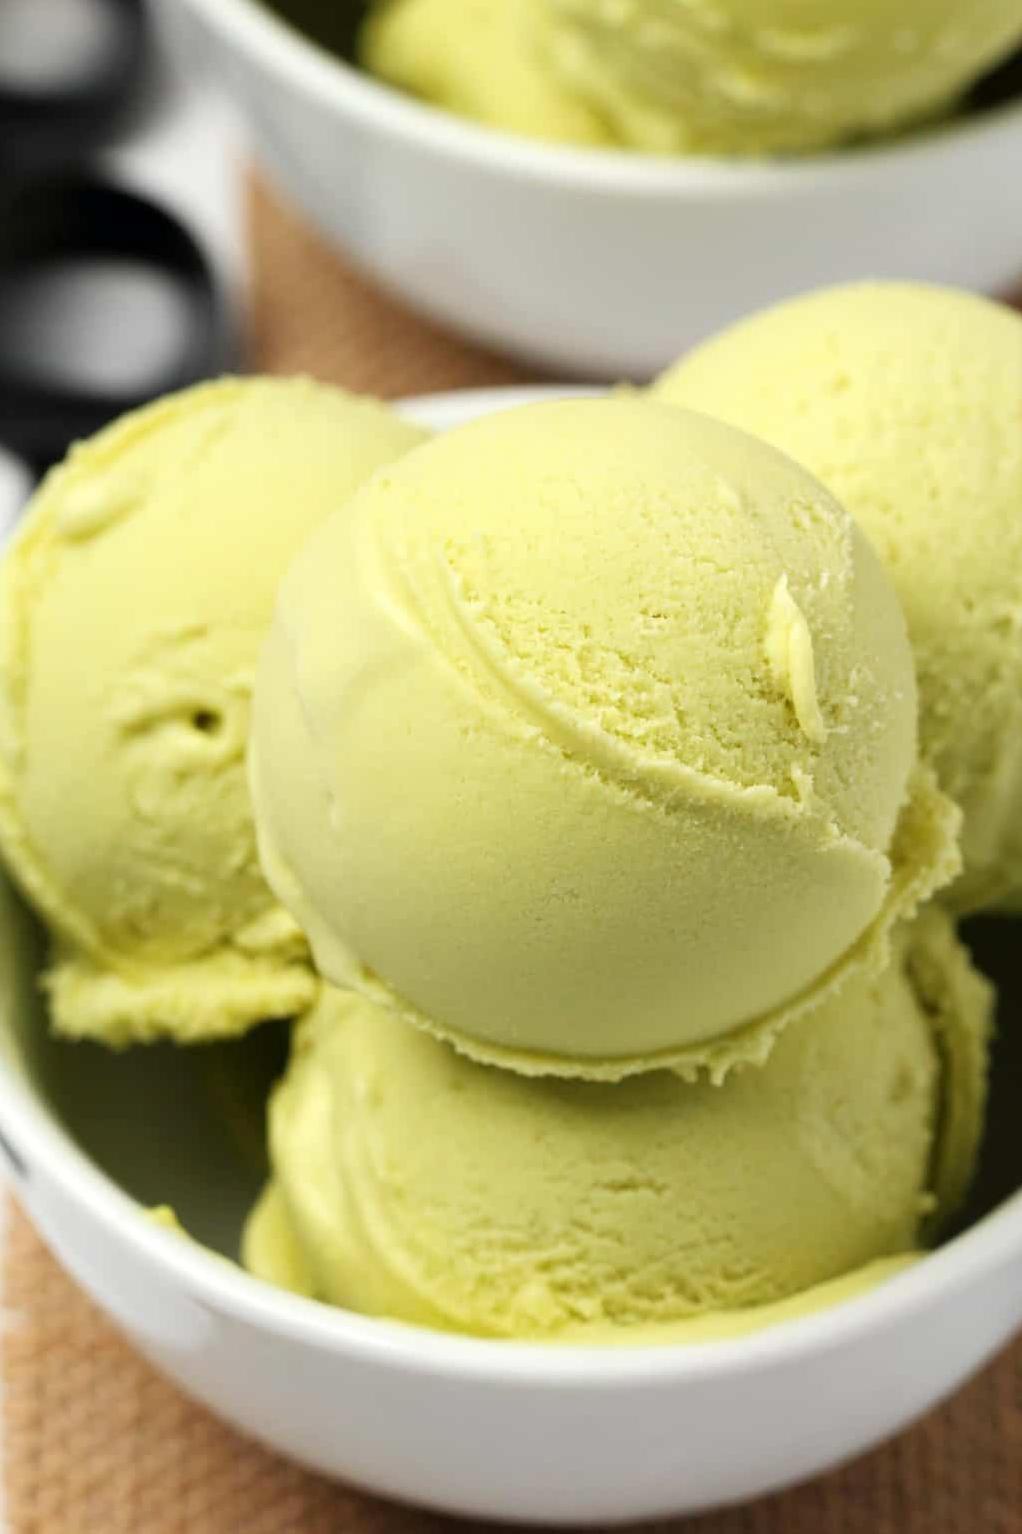  Creamy and dreamy, this vegan avocado ice cream is a real treat for your taste buds.